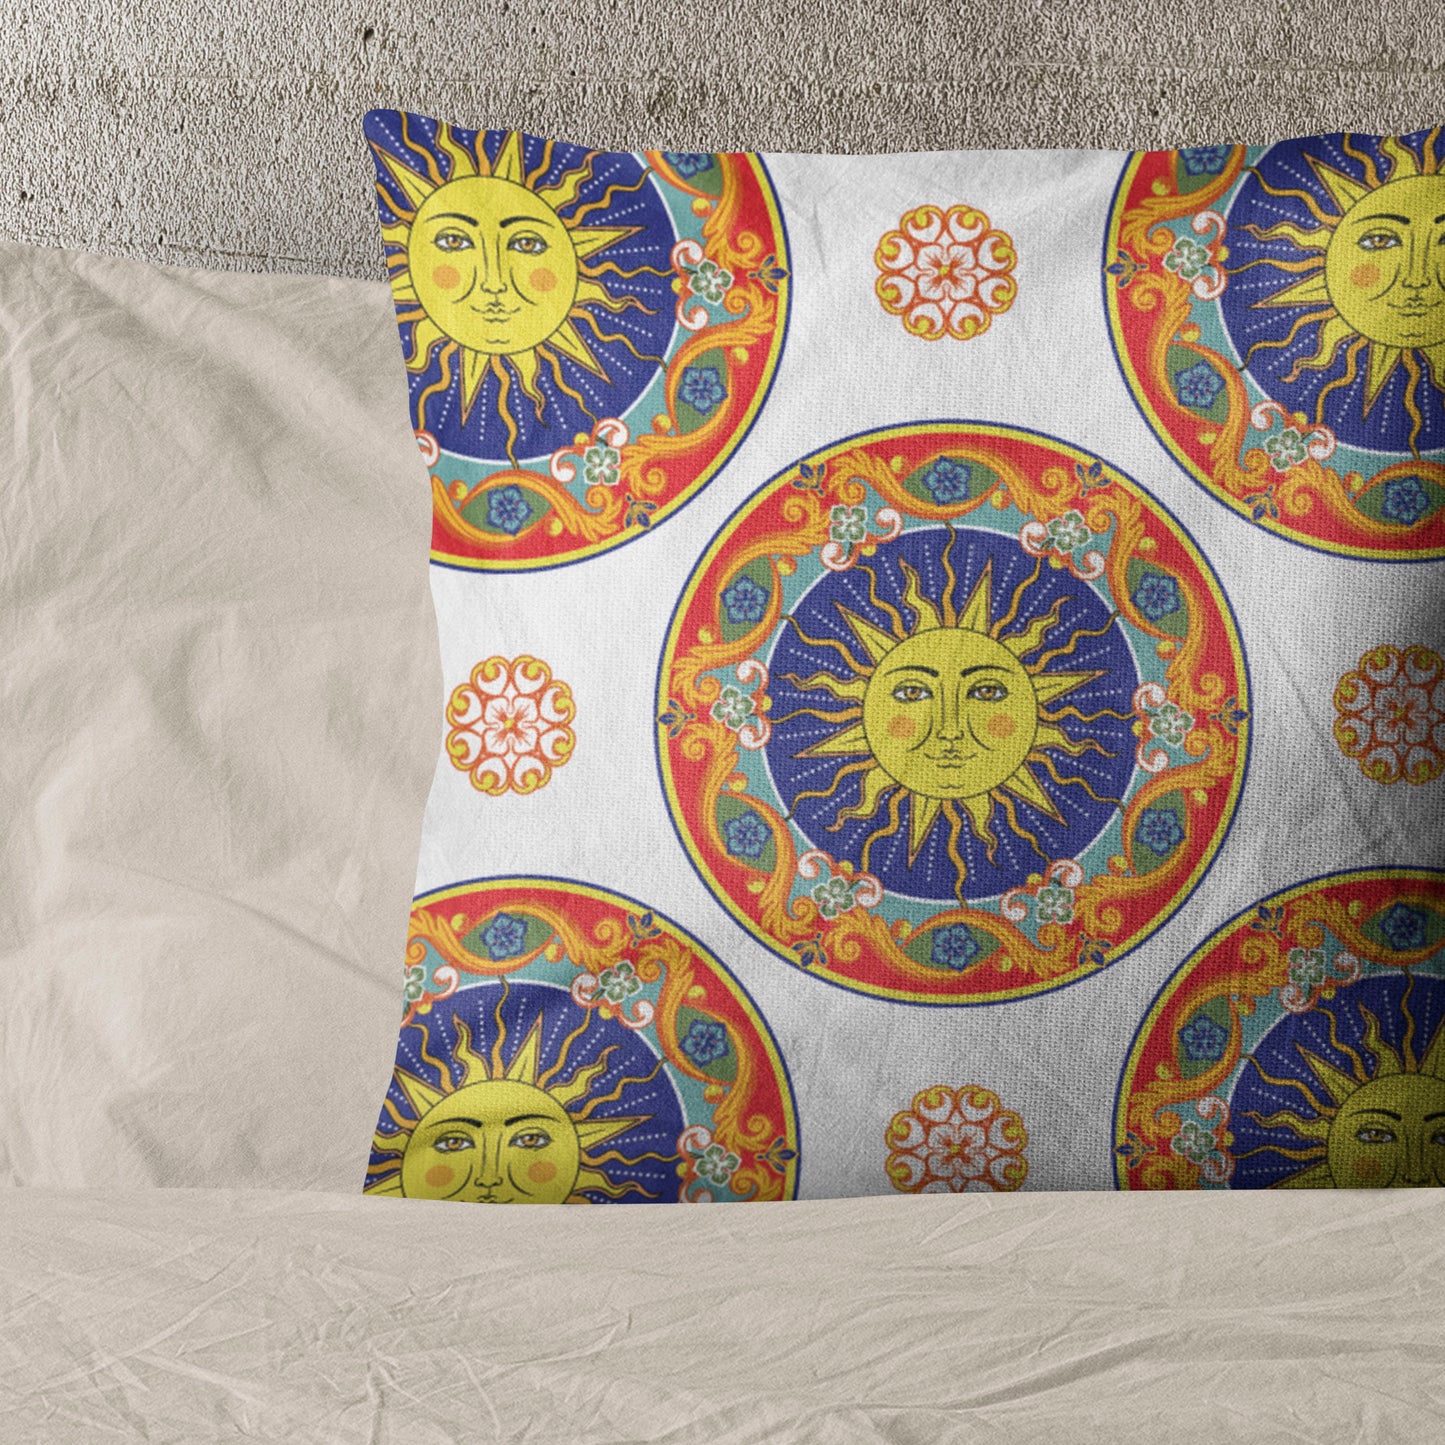 Ethnic Print Linen By The Yard or Meter, Mandala, Sun with Human Face Print Linen Fabric For Bedding, Curtains, Clothing & Upholstery